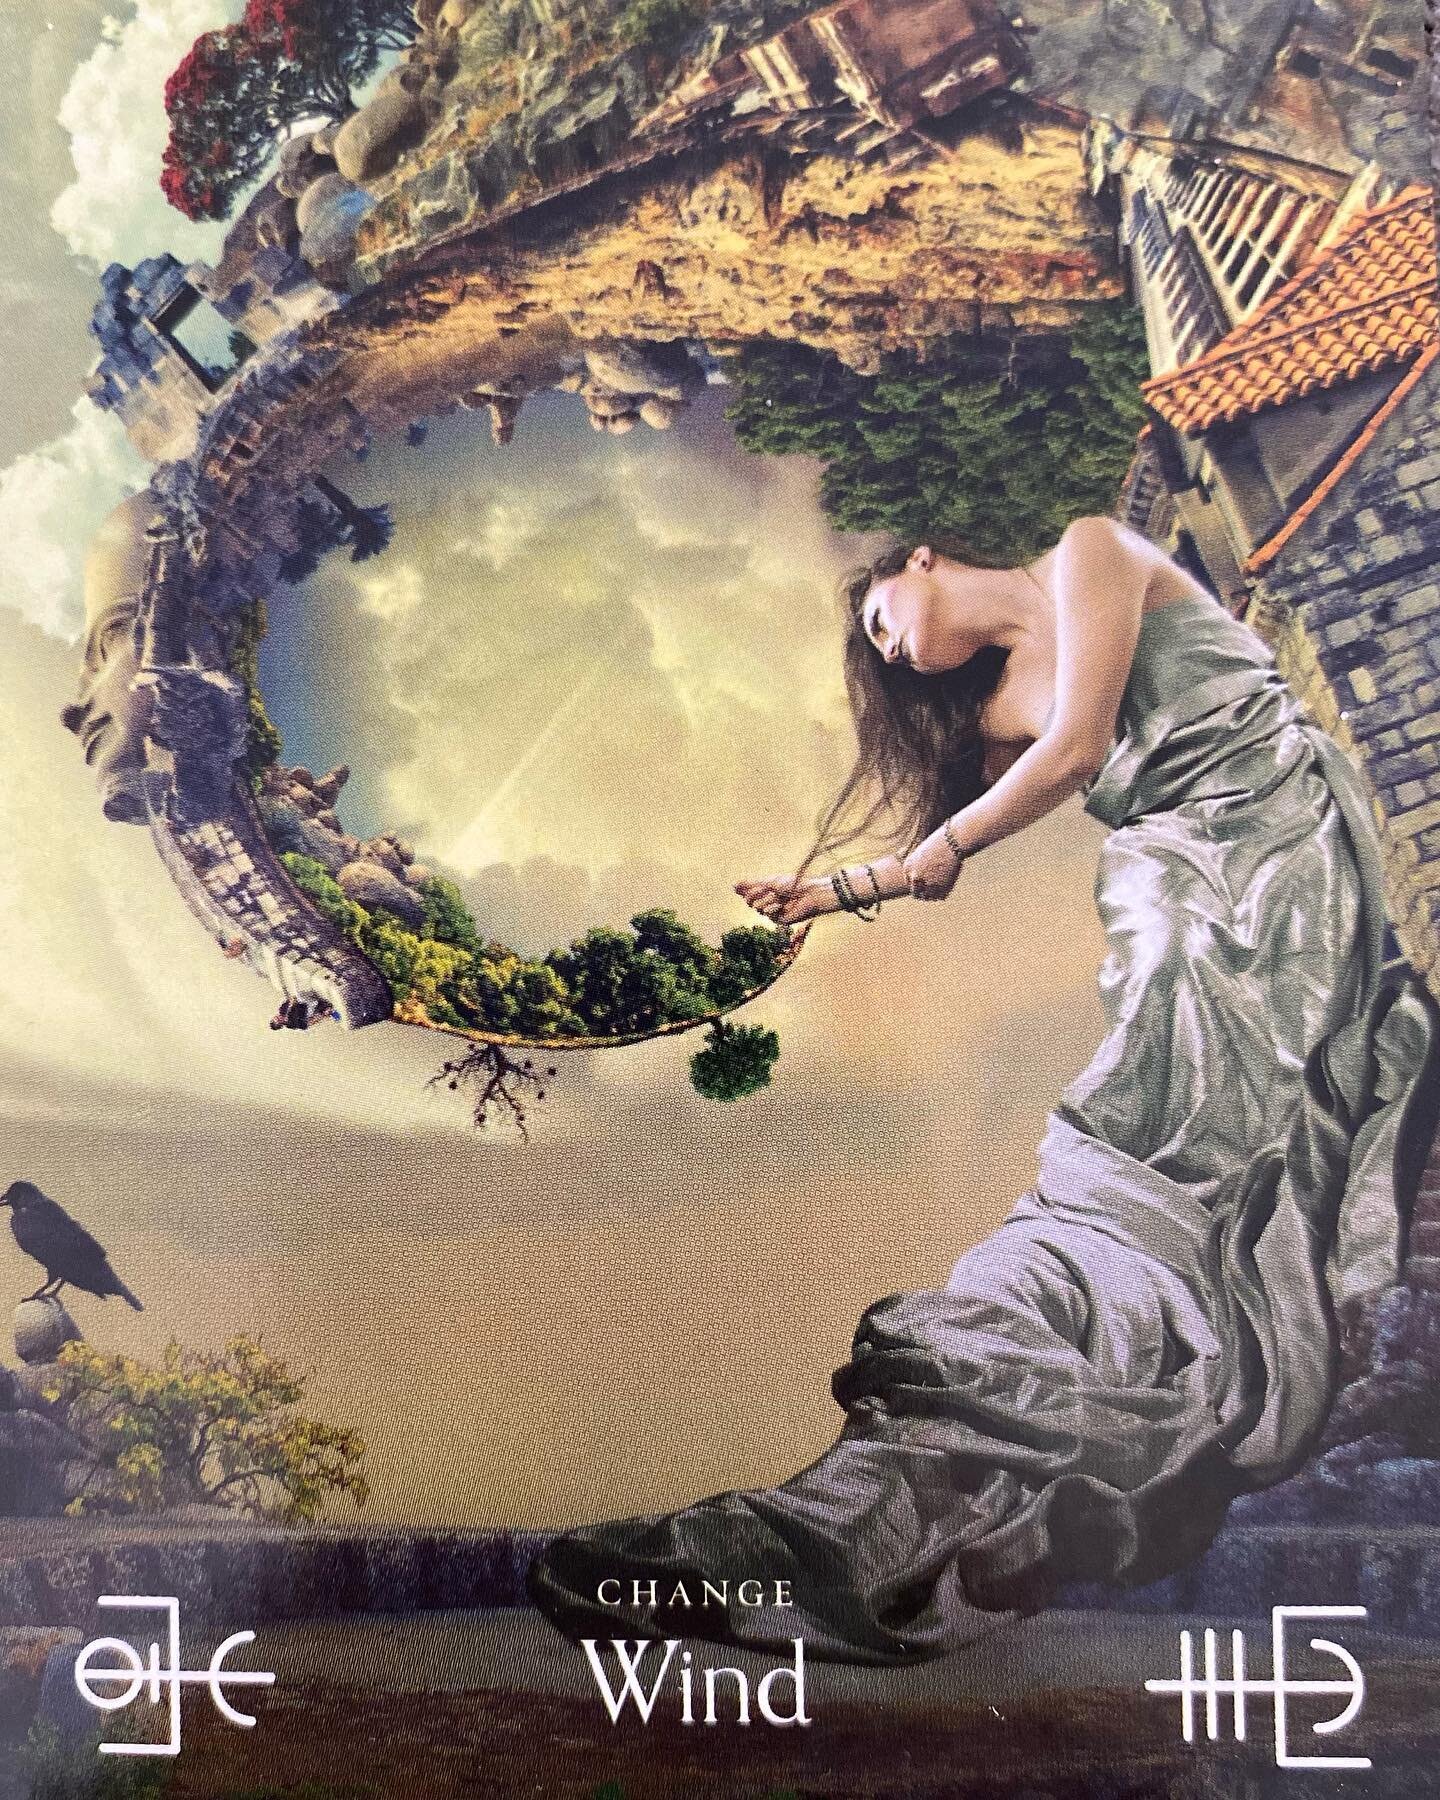 Oracle card energy reading ✨ 
We are being called to shift in a new direction. 
Sometimes we think we have a clear vision of our direction &amp; then wind comes to churn every up. 
Wind is change, embrace the change in direction &amp; opportunities a